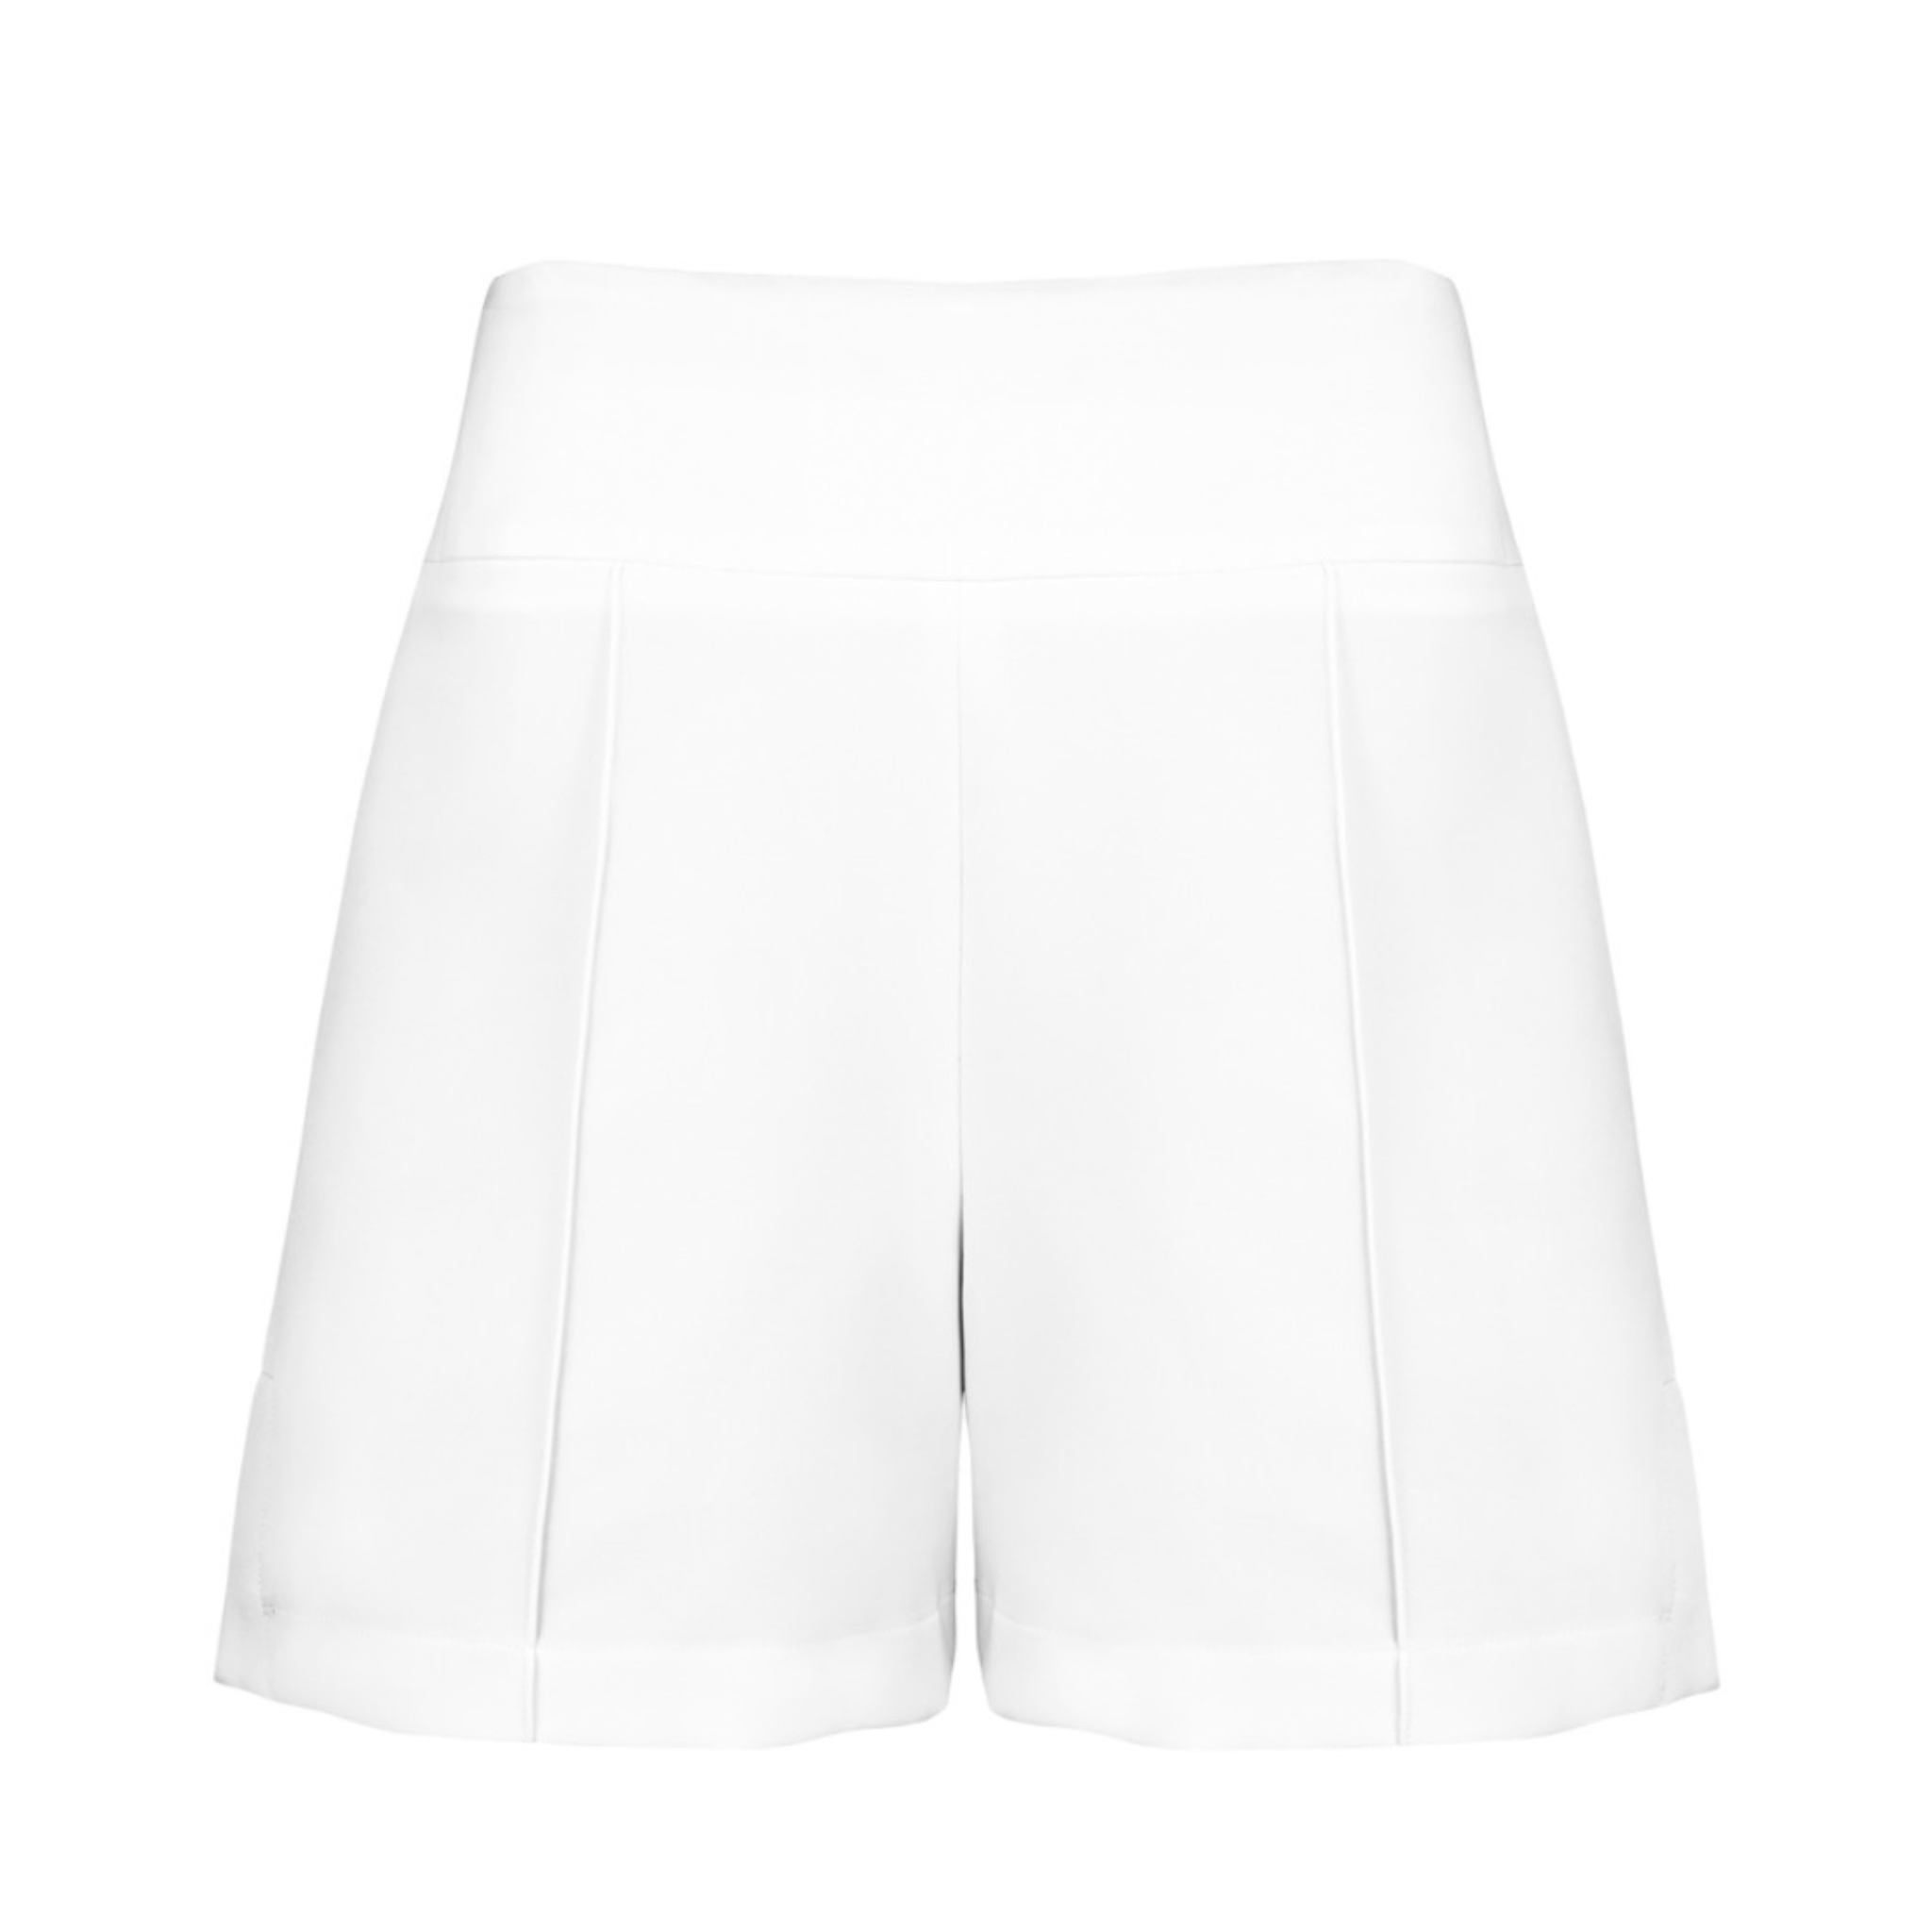 White high-waisted, wide-leg tailored shorts for women. These chic and versatile shorts feature a high waistline and wide-leg silhouette, combining comfort and style effortlessly. The crisp white color adds a touch of elegance, making them a perfect choice for a polished and fashionable summer look